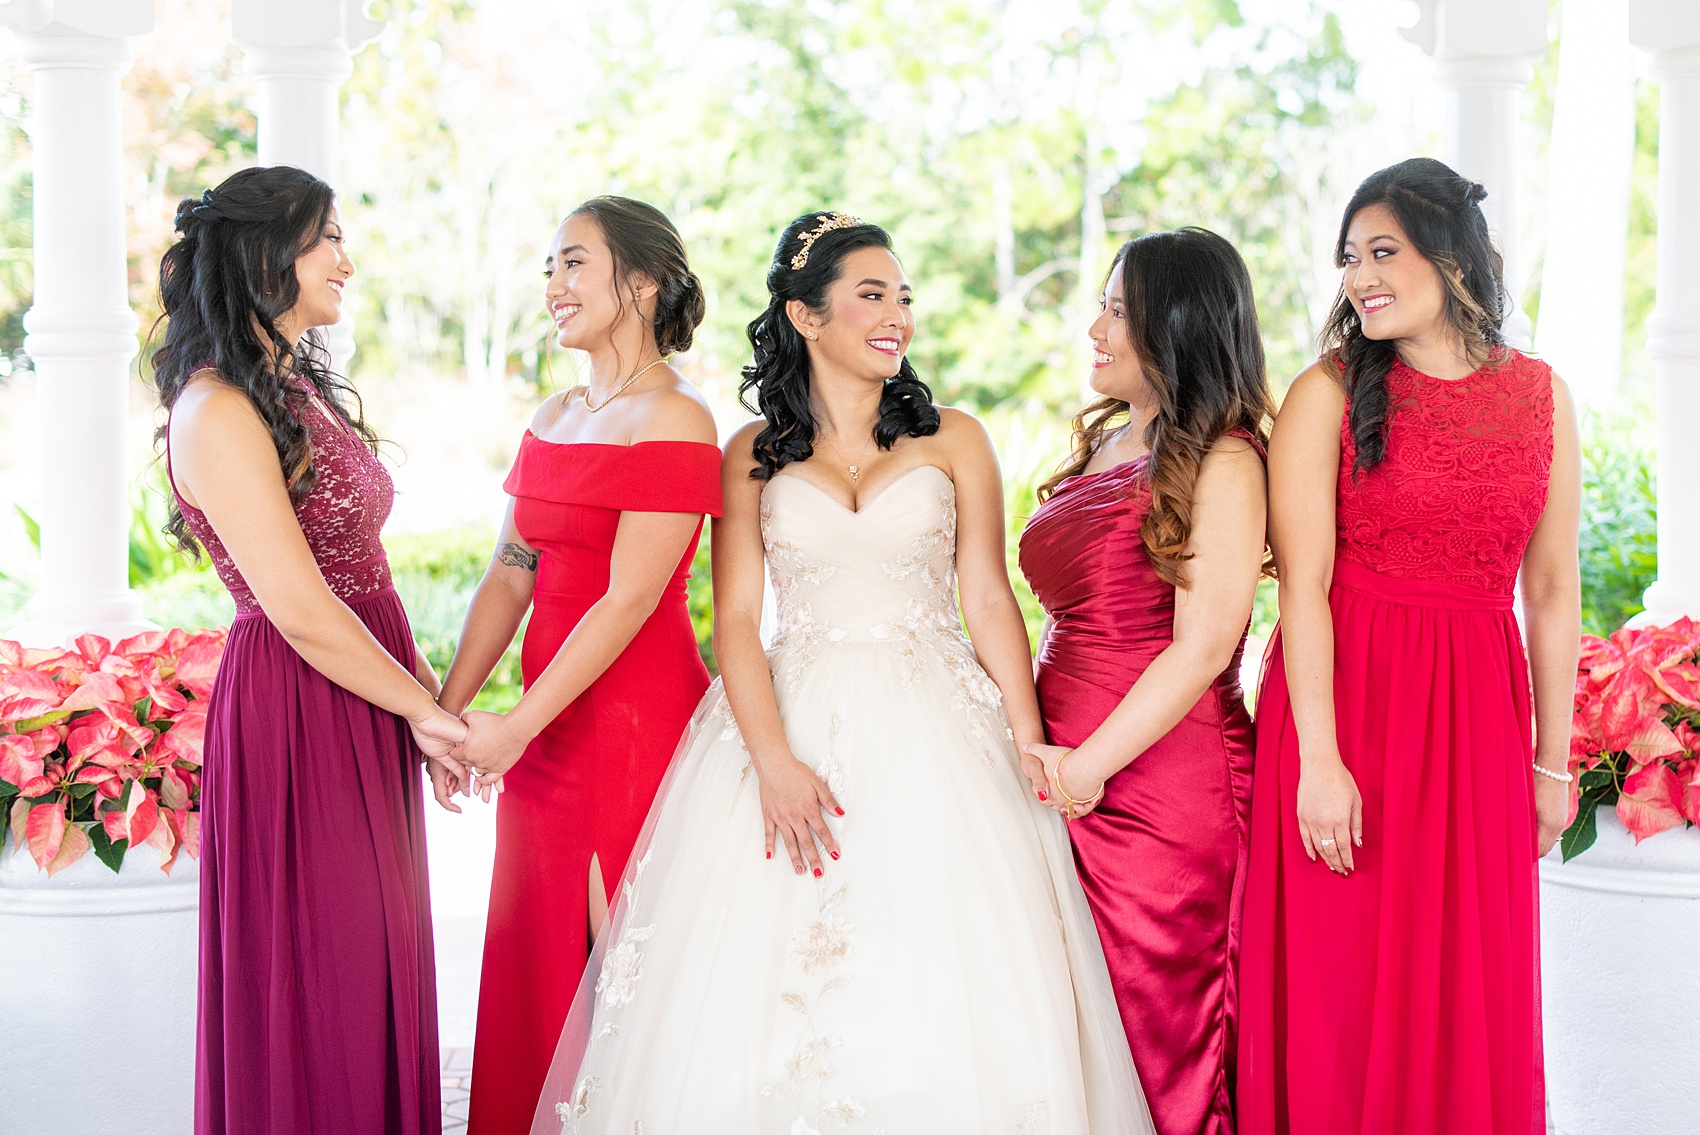 Photographs of a Walt Disney World bridal party by Mikkel Paige Photography. The bride chose the venues of the Grand Floridian, Wedding Pavilion and The Contemporary Resort for photos and fun locations. One even overlooked the Magic Kingdom Park! Their dream wedding included red details: the bridesmaids wore mismatched dresses and carried rose bouquets. #disneywedding #disneybride #waltdisneyworld #DisneyWorldWedding #BeautyandtheBeast #redrosewedding